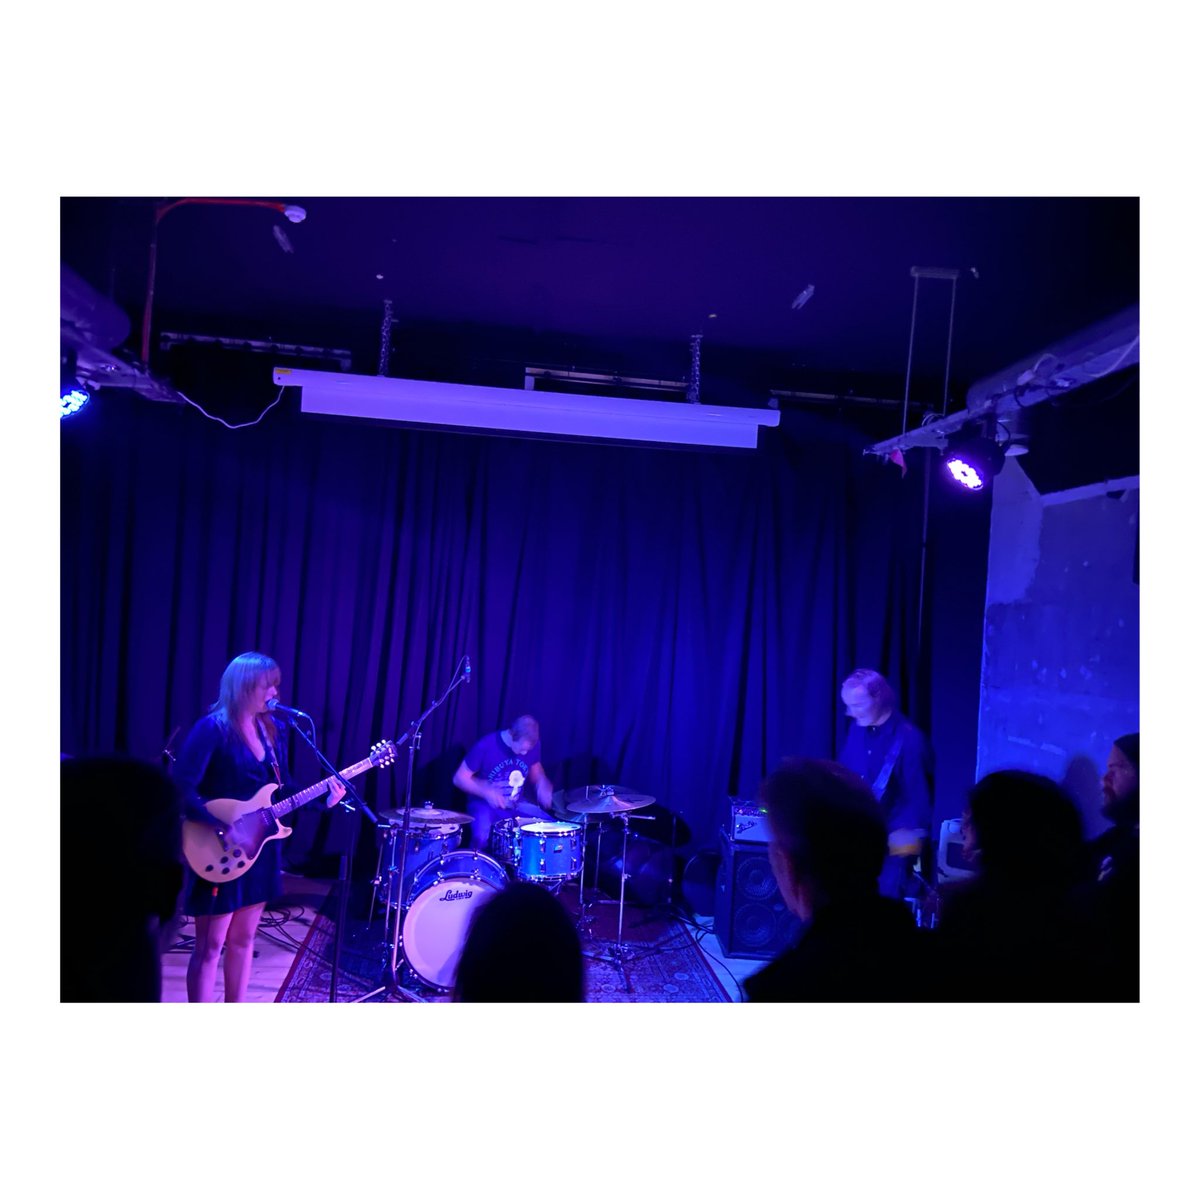 went to see @jilllorean last night and it was a real tonic. proof of the positive effect truly excellent music and performance can have on you. if you’re in aberdeen, get down to their @IMP_aberdeen show at the tunnels tonight for a joyous experience.